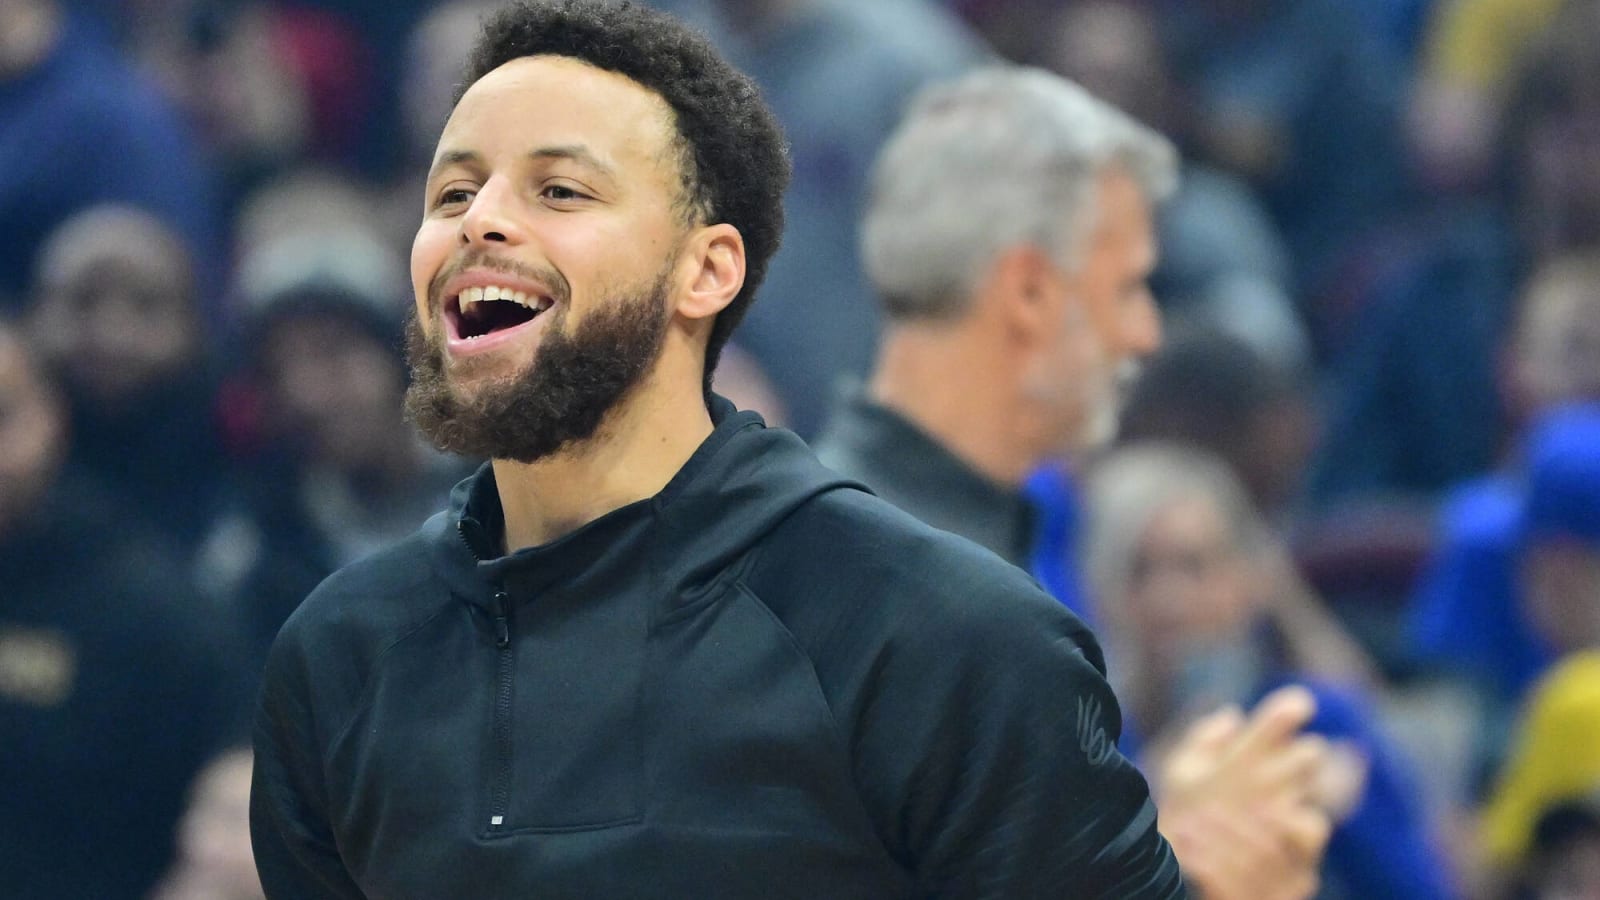 Team USA Steph Curry ‘Excited’ About 2024 Olympics Opportunity